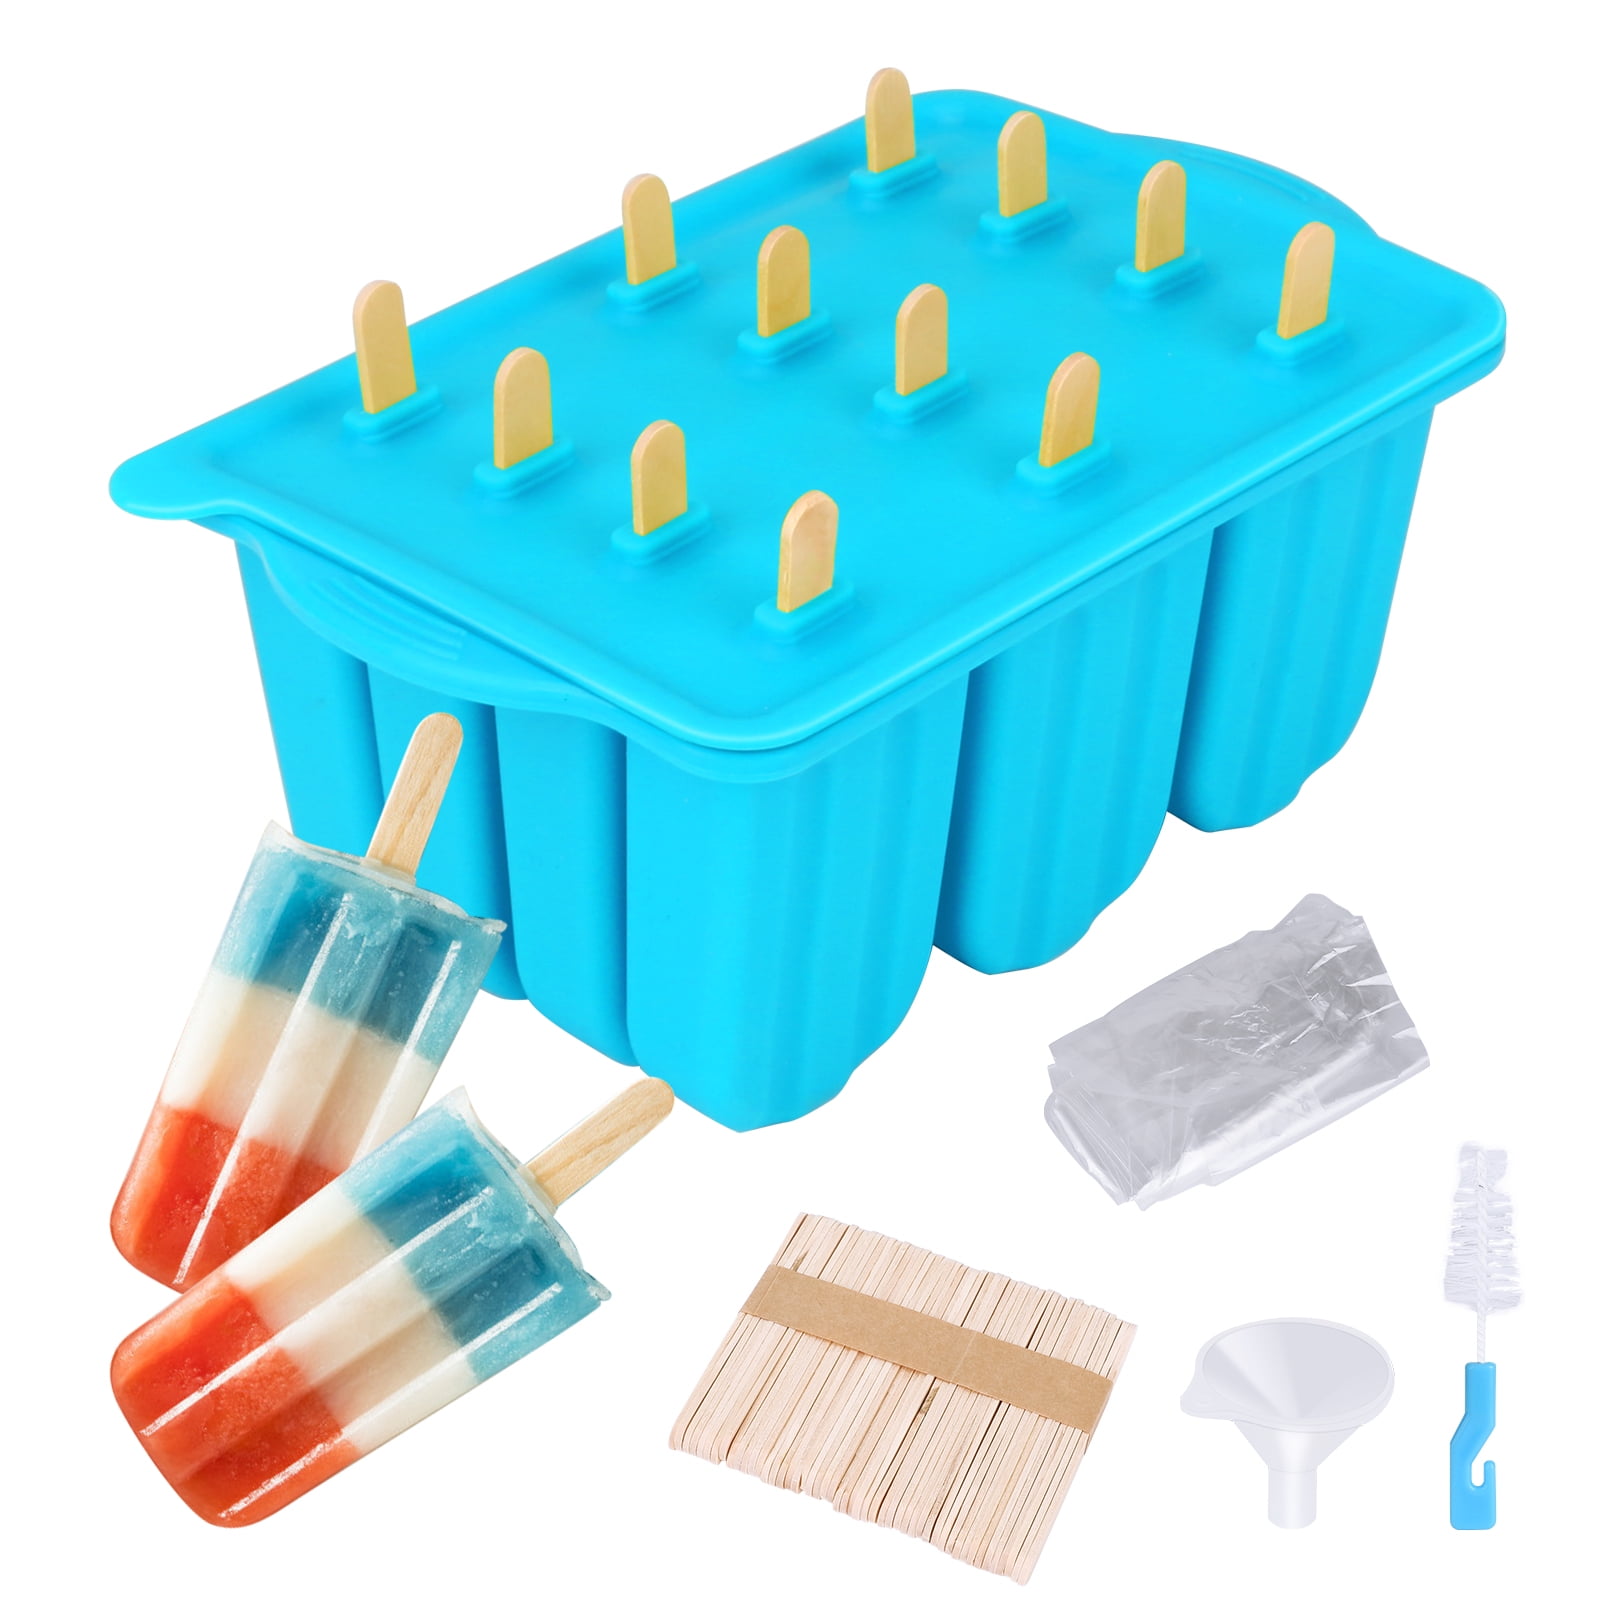 WIBIMEN Popsicle Mold Set, 8 Pieces Mini Silicone Popsicle Maker, BPA-Free  Easy Release Homemade Ice Pop Molds, Ice Cream Molds with 50 Popsicle